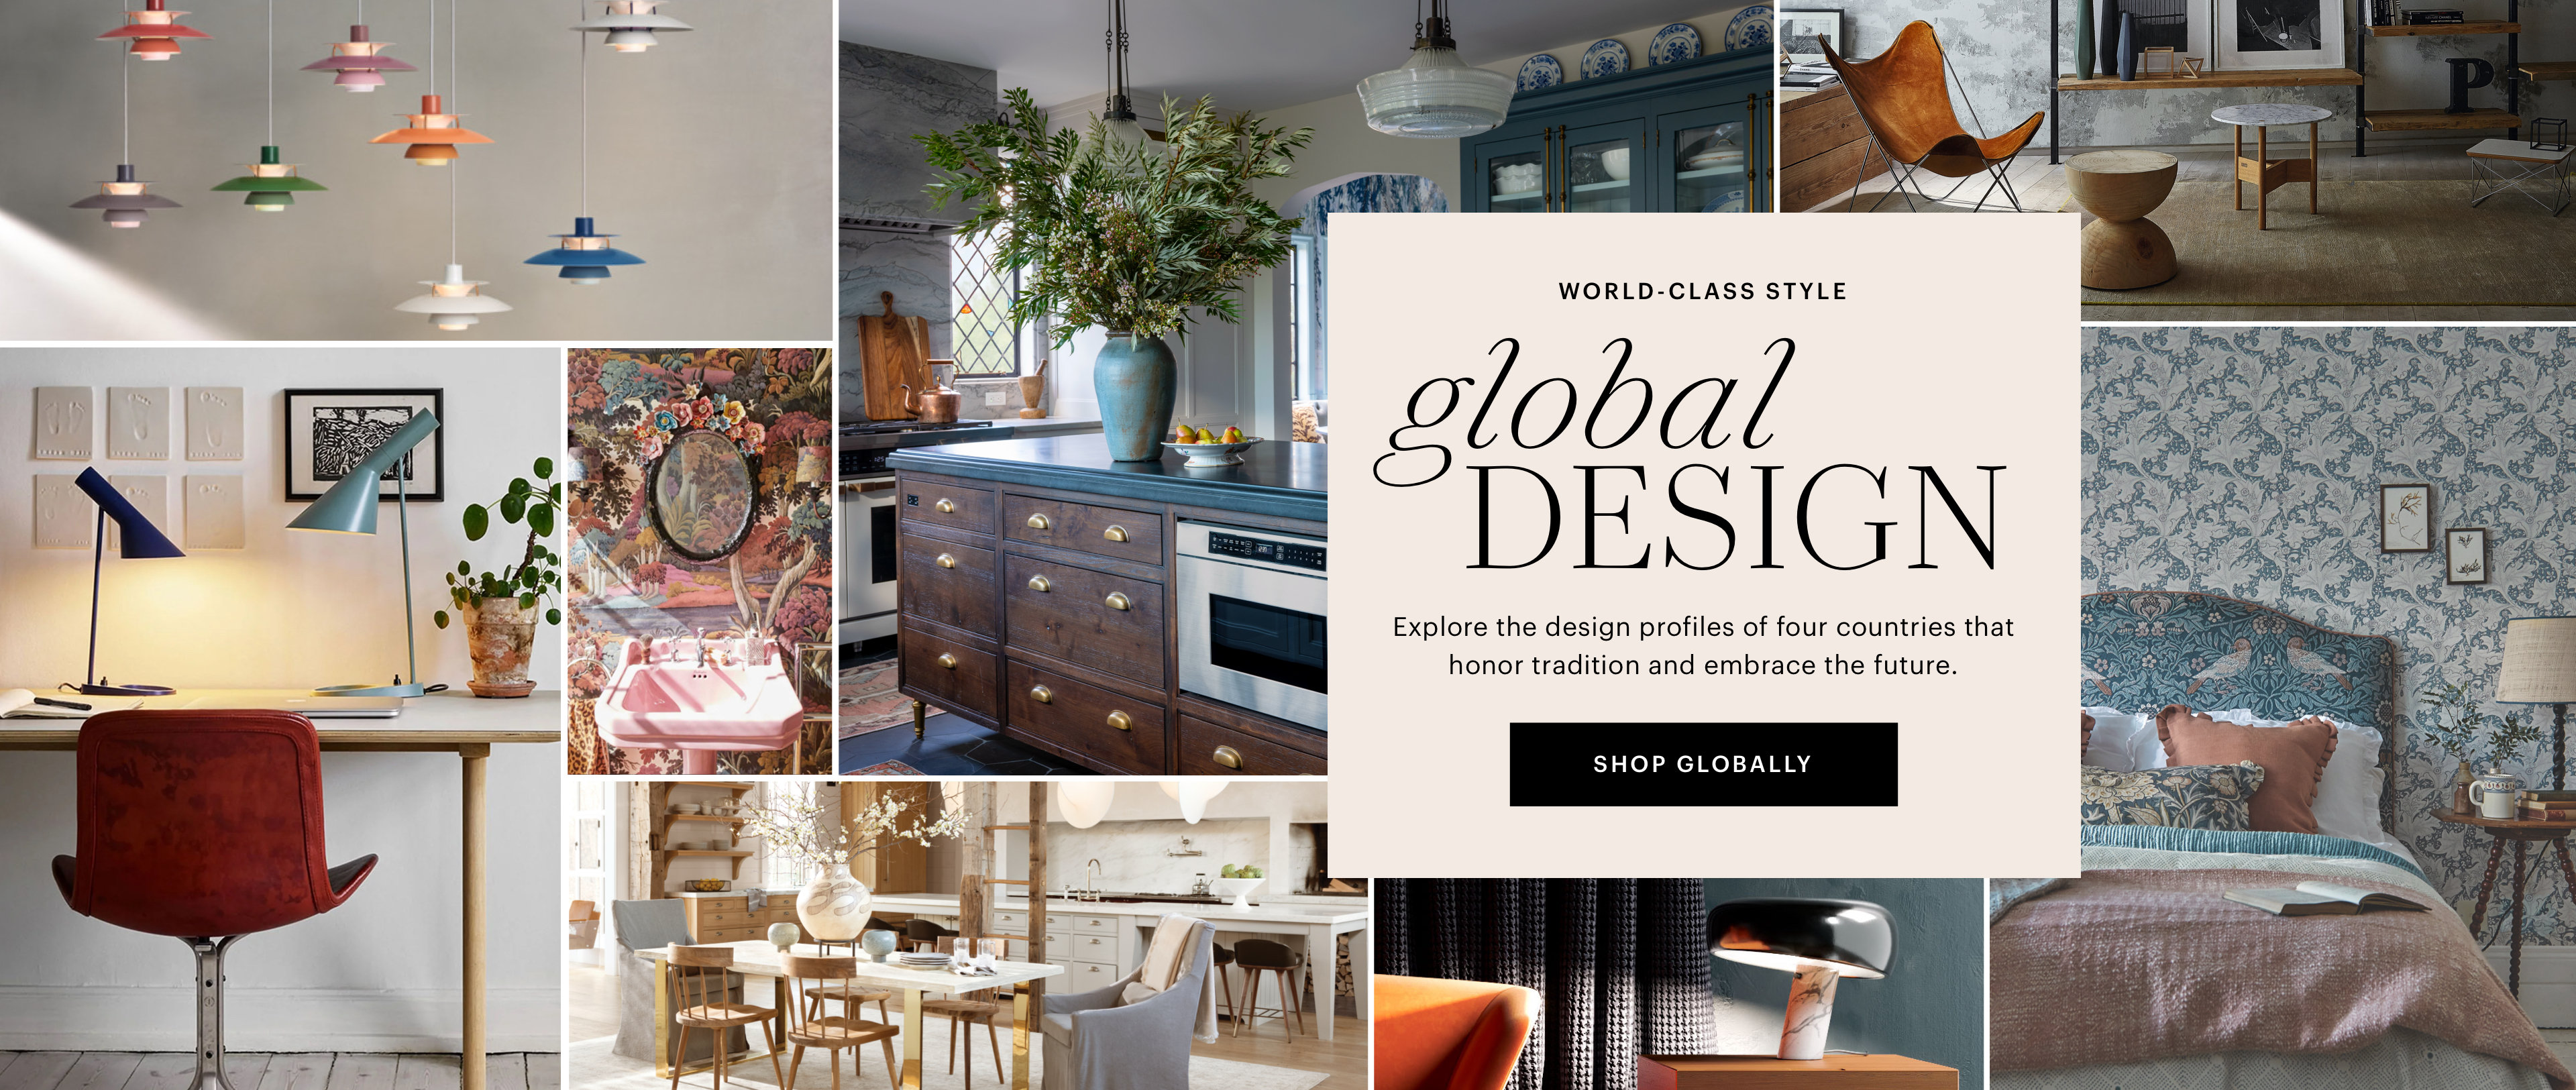 Global View of Design